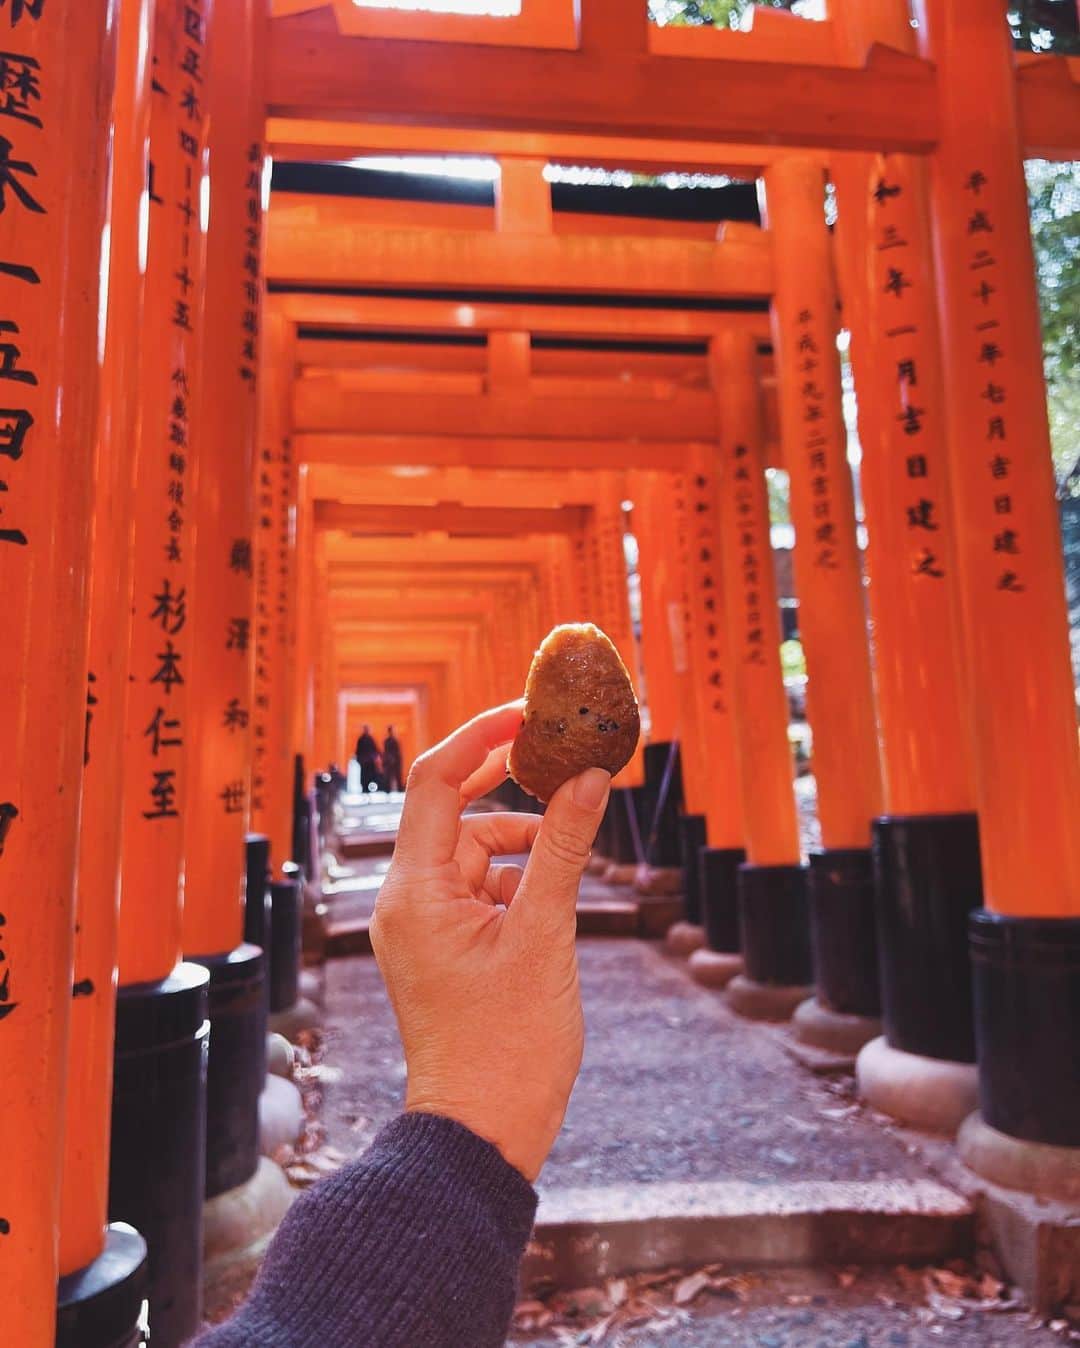 Girleatworldのインスタグラム：「⚠️This photo is a throwback to when I visited Kyoto back in December. I wouldn't condone traveling now, as Japan is experiencing the sixth wave from Omicron variant.  This is Inarizushi at the Senbon Torii (thousand torii gates) at Fushimi Inari Shrine ⛩ In Japanese mythology, Inari Okami refers to the god of rice, and foxes are often seen as the messenger of Inari. Thus, Inarizushi gets its name from its shape, which looks like pointy fox ears 🦊. Inarizushi is made from Aburaage (fried tofu skin) wrapped around sushi rice. Aburaage is also said to be the favorite food of foxes!  #inarizushi #inarisushi #fushimiinari #fushimiinaritaisha #fushimiinarishrine #kyoto #⛩ #🍣 #visitjapanjp #shotoniphone」